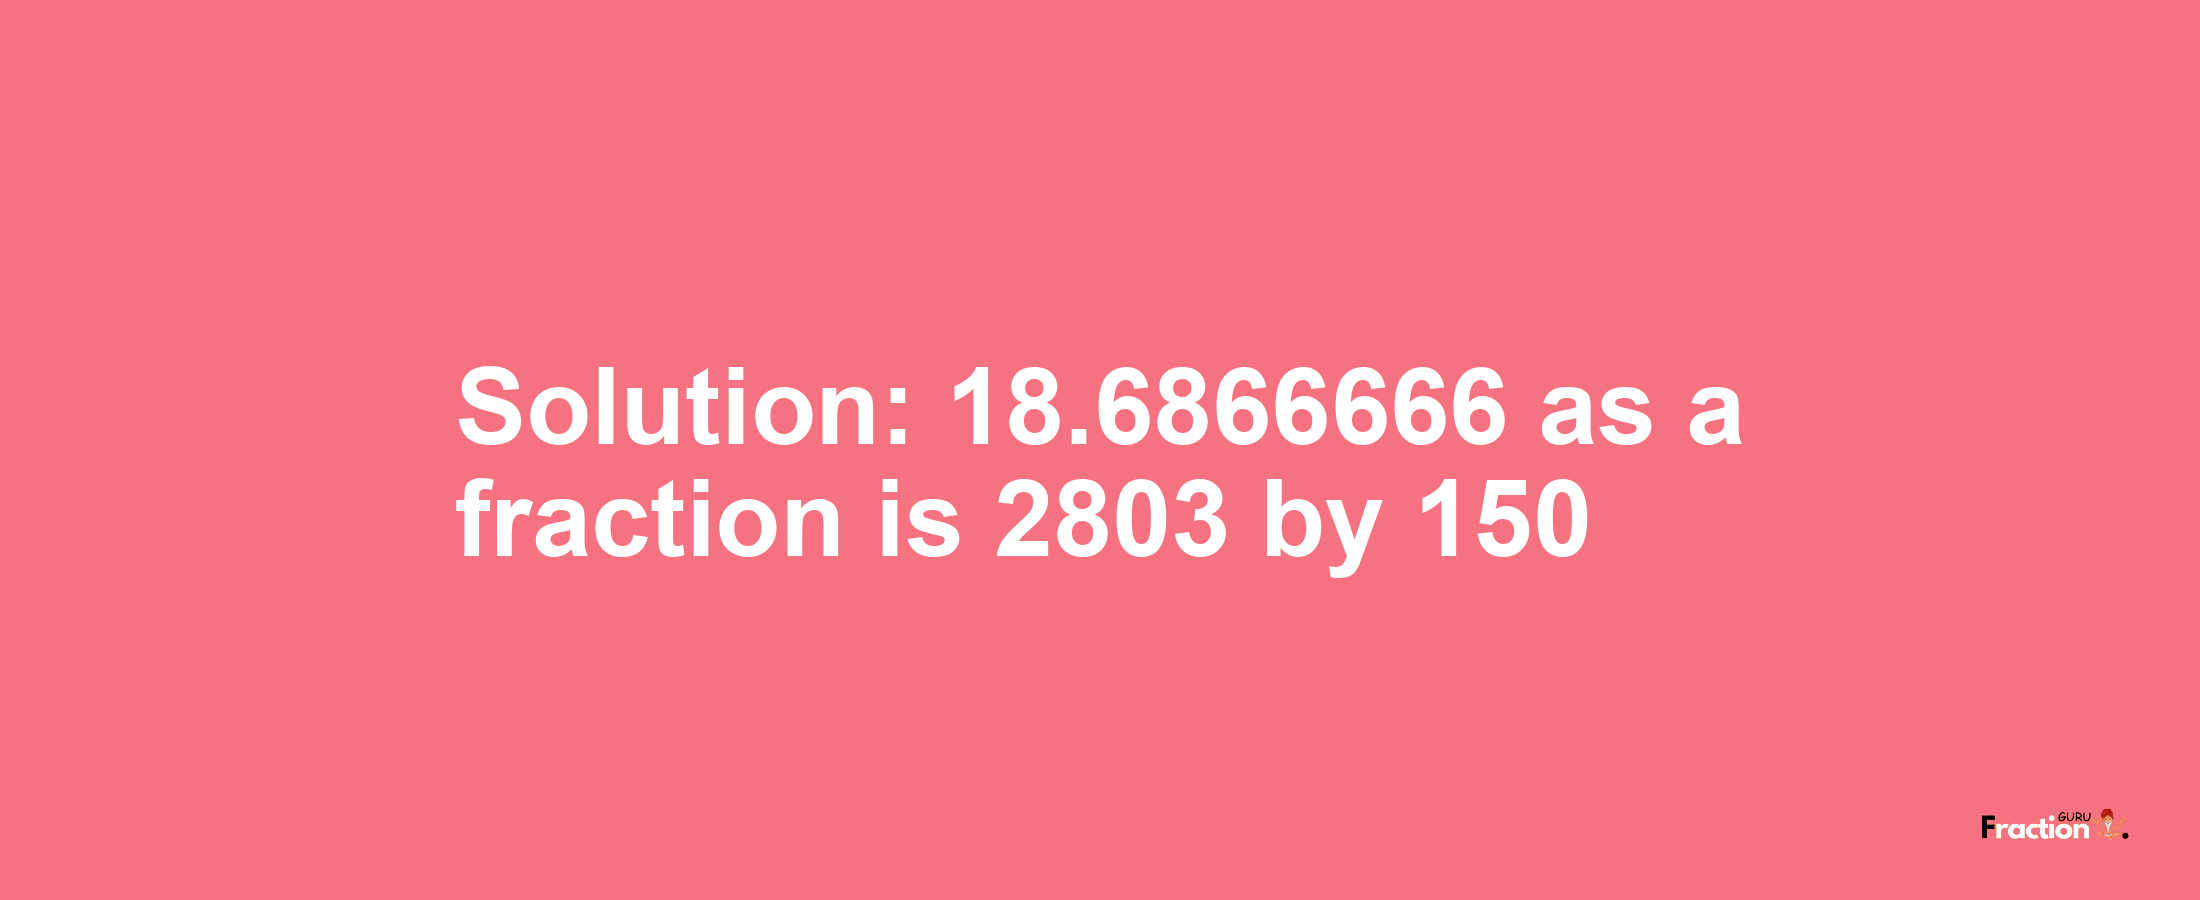 Solution:18.6866666 as a fraction is 2803/150